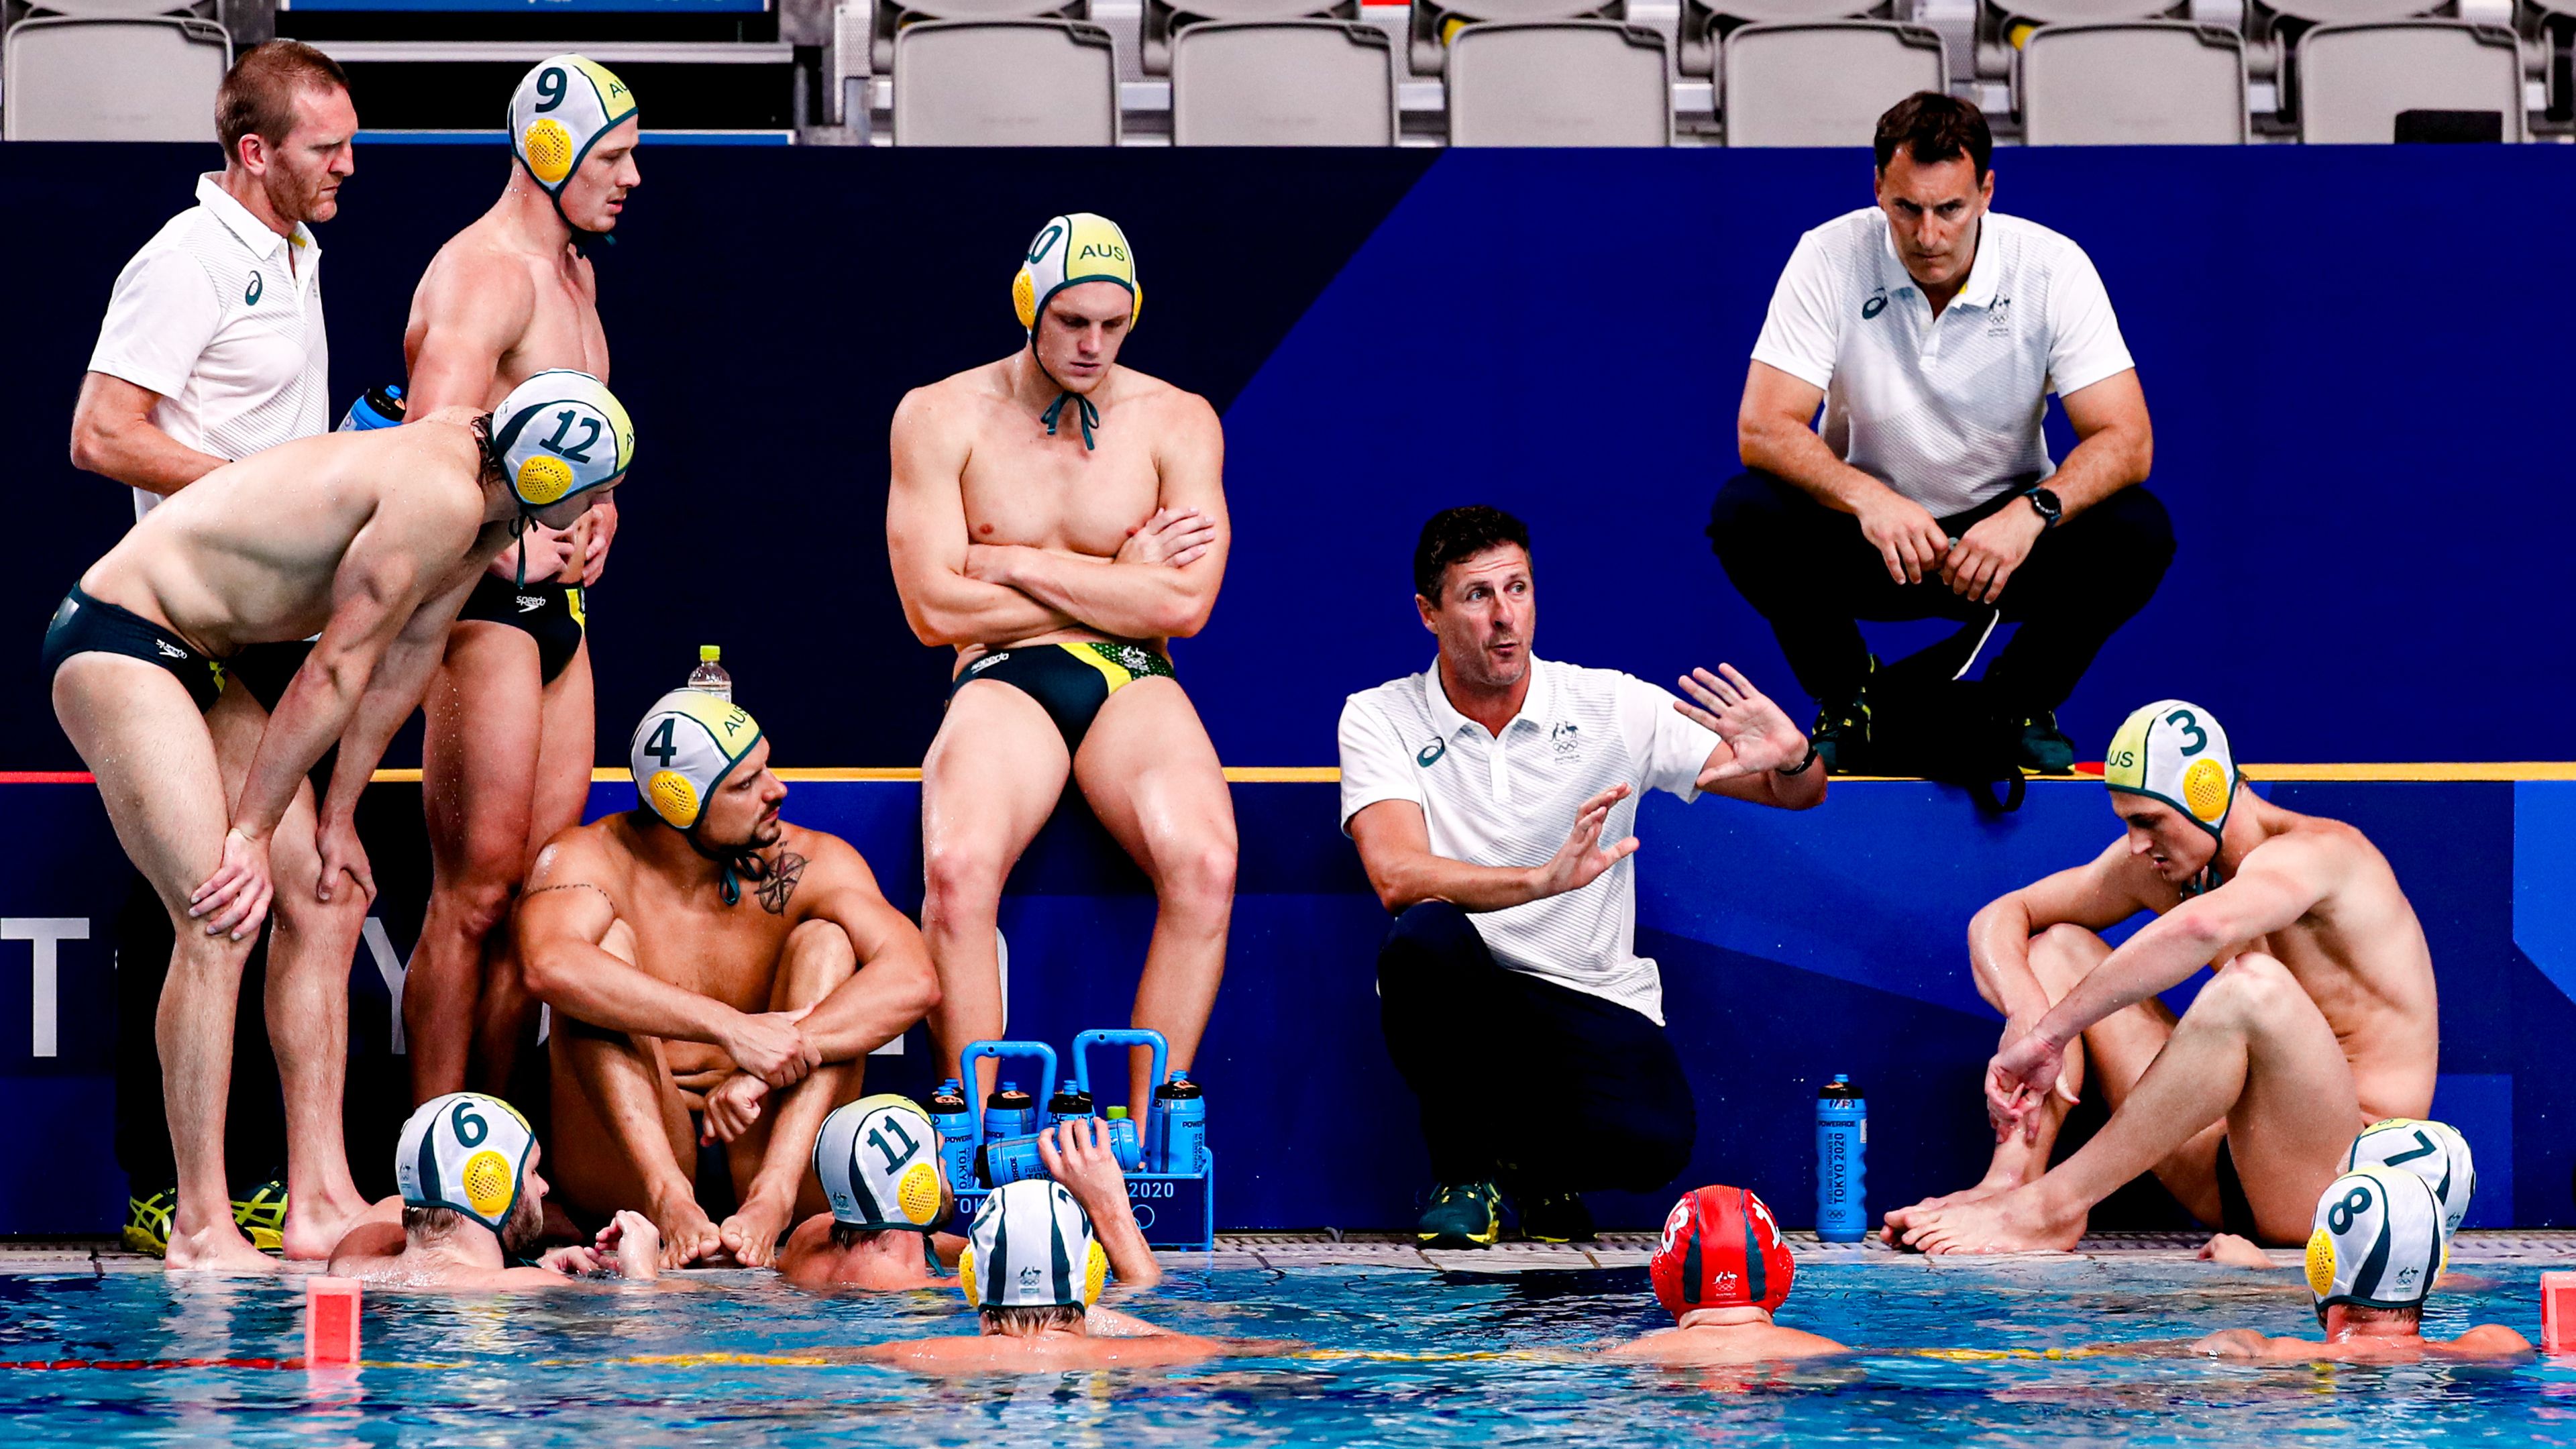 Tokyo Olympics 2021: Australia upset Croatia in water polo win as coach caught in odd situation